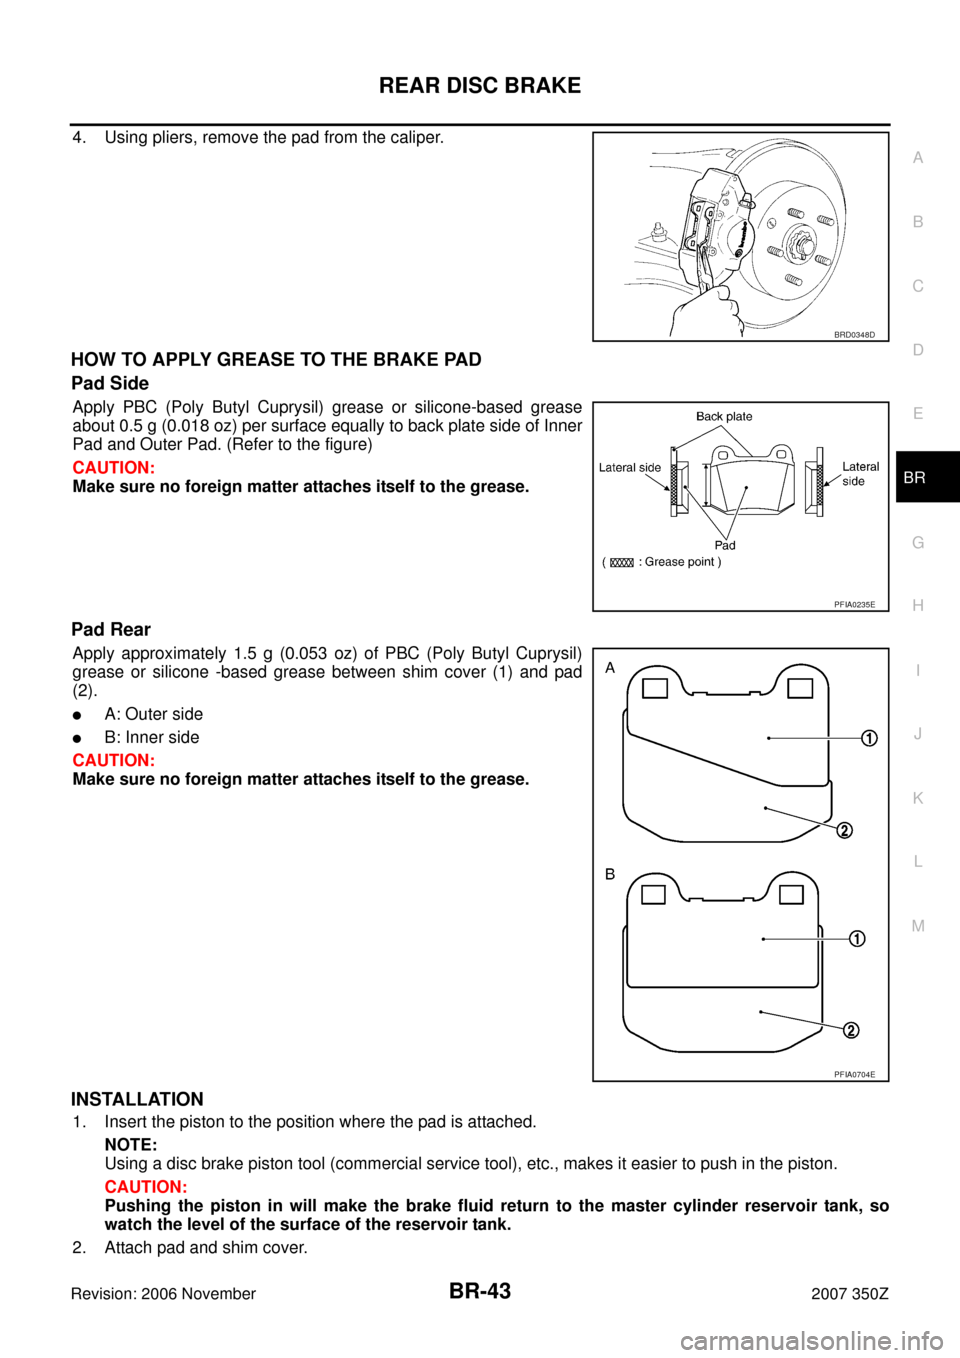 NISSAN 350Z 2007 Z33 Brake System Workshop Manual REAR DISC BRAKE
BR-43
C
D
E
G
H
I
J
K
L
MA
B
BR
Revision: 2006 November2007 350Z
4. Using pliers, remove the pad from the caliper.
HOW TO APPLY GREASE TO THE BRAKE PAD
Pad Side
Apply PBC (Poly Butyl C